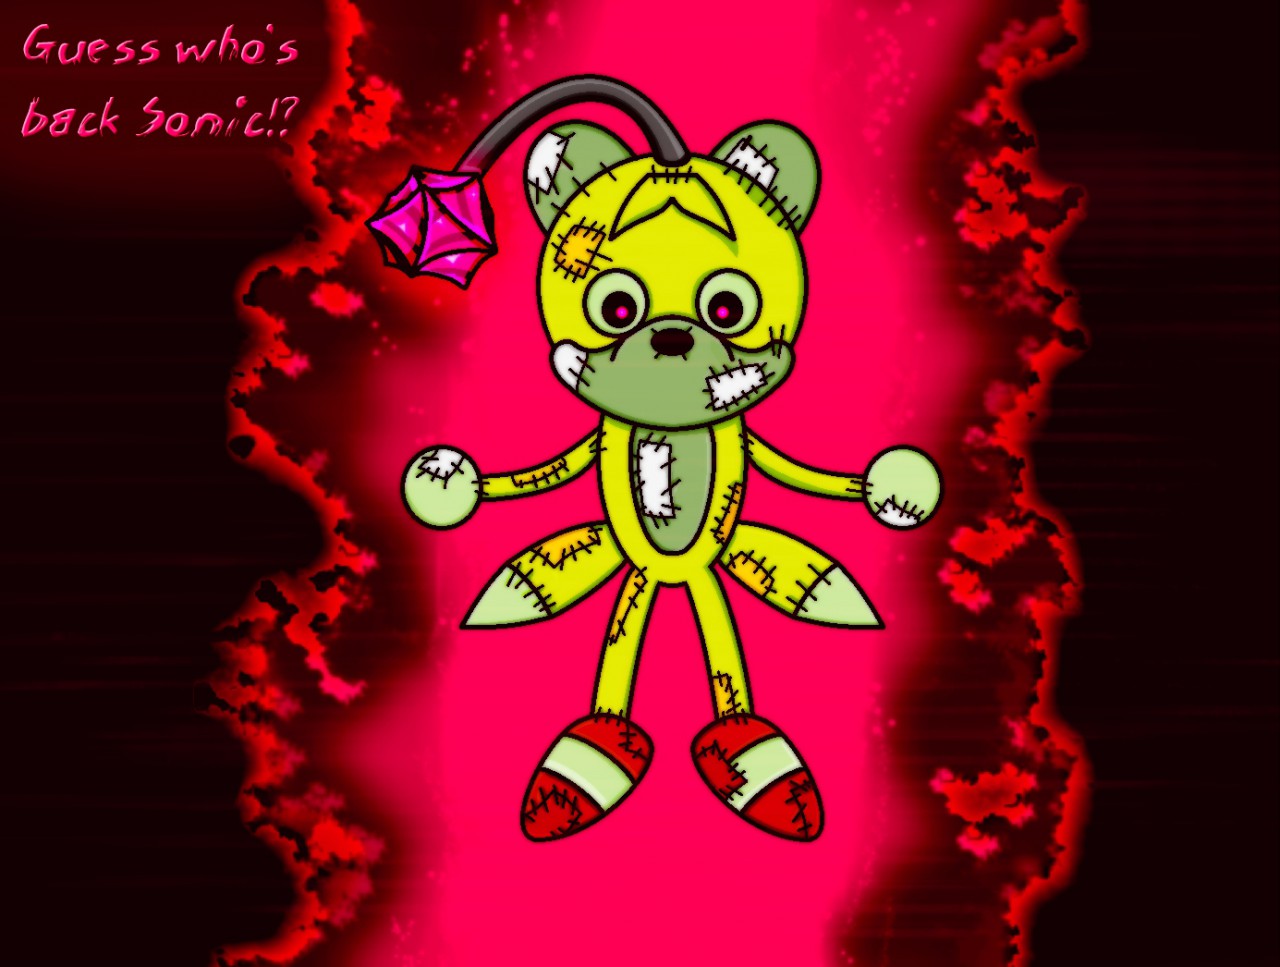 What If Tails Doll Was Pitched Like A Normal Chromatic? 